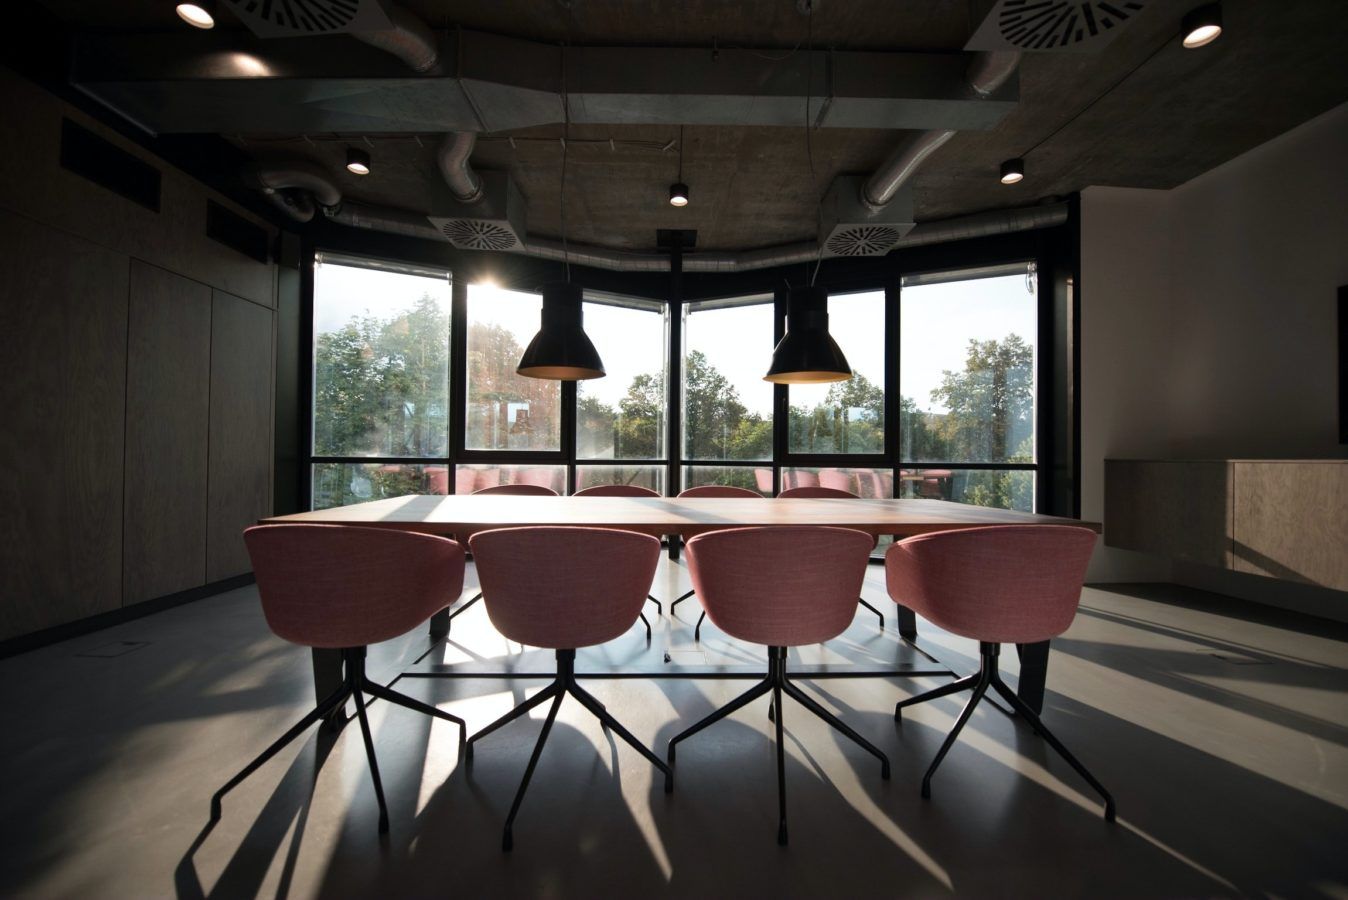 4 workspace design ideas that are sure to please employees in a post pandemic world